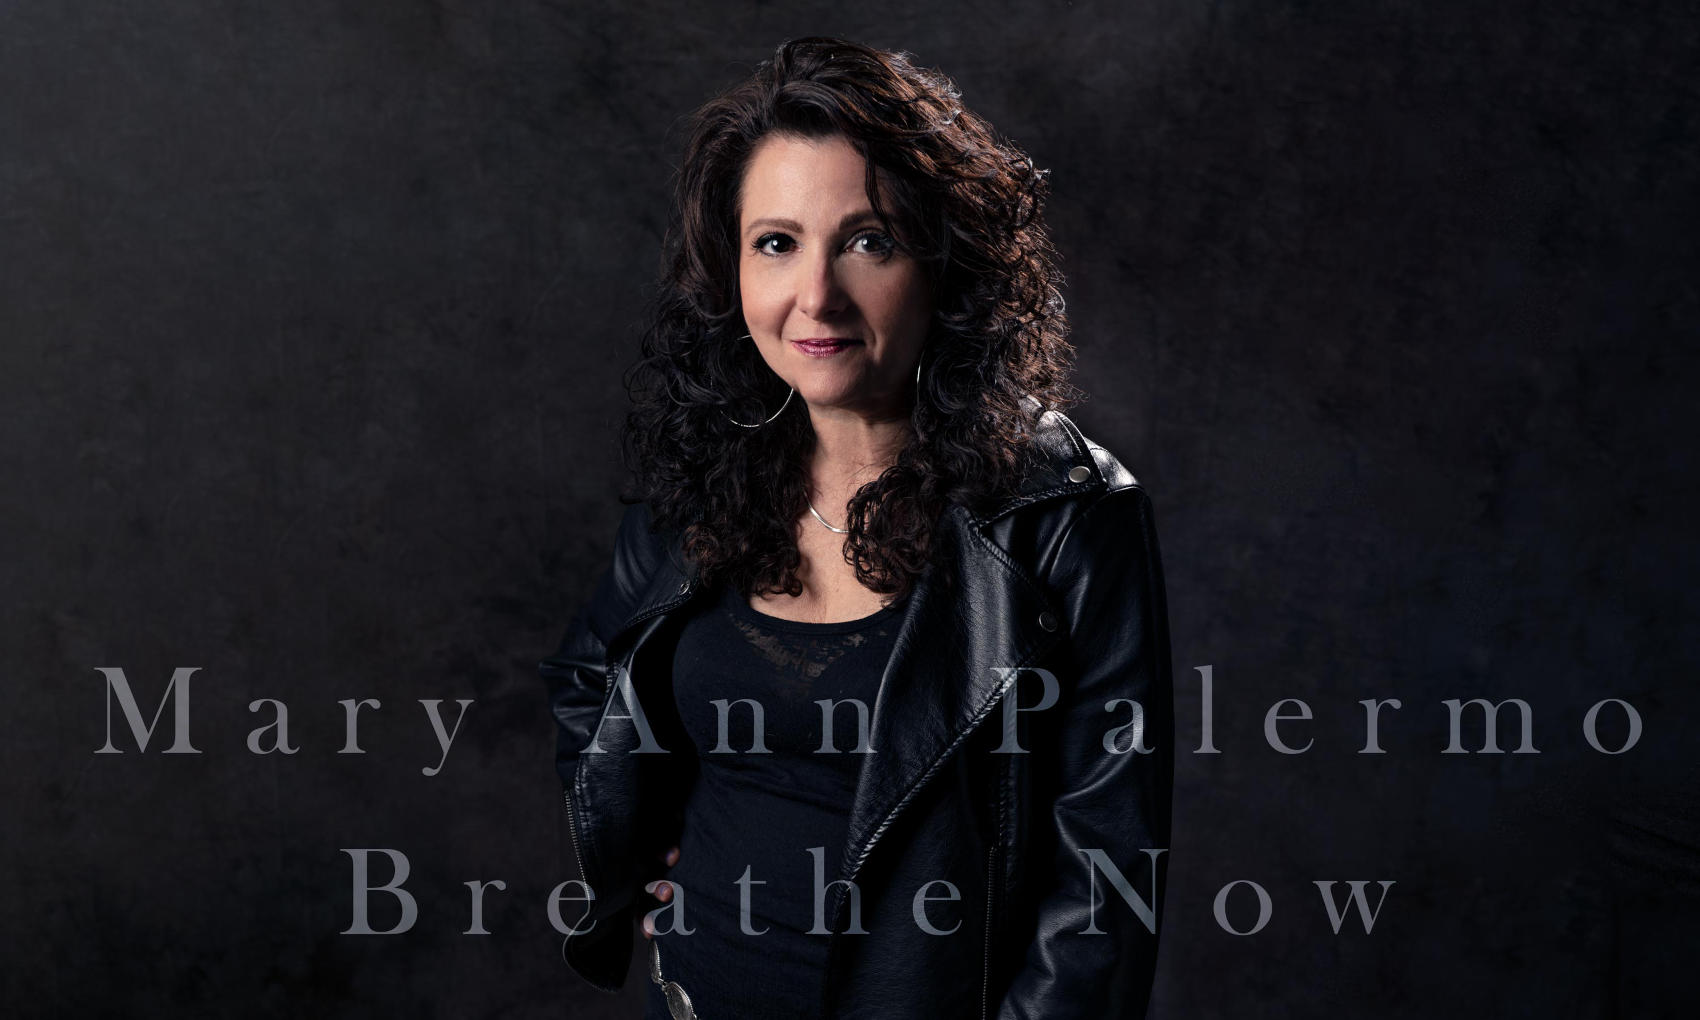 Singles Release, Breathe Now, Mary Ann Palermo